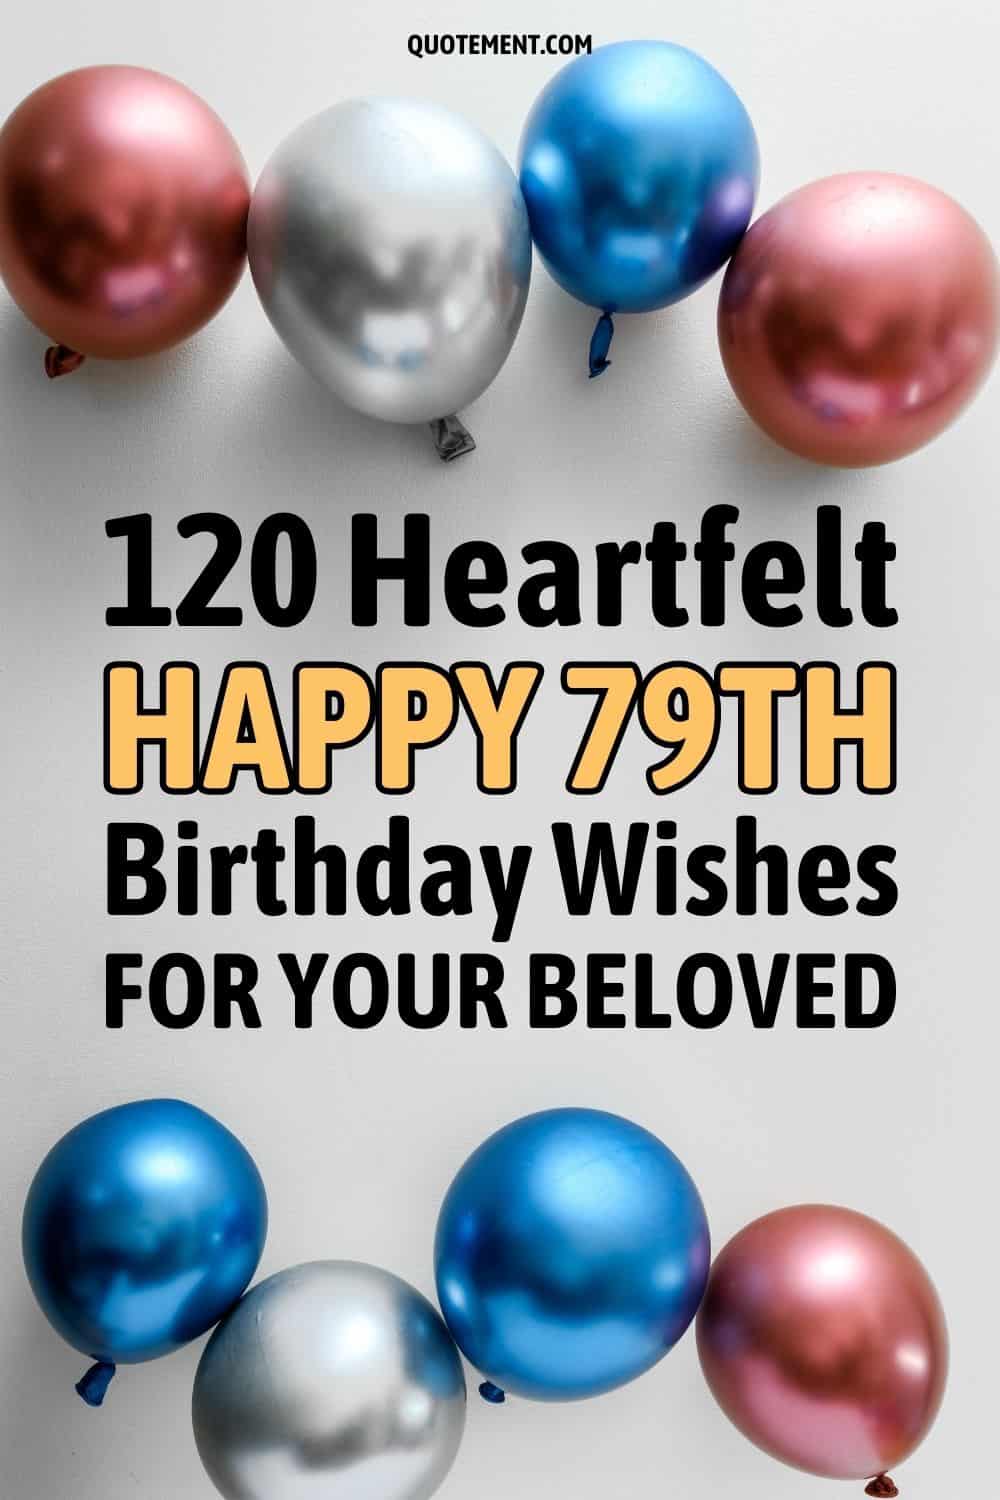 120 Heartfelt Happy 79th Birthday Wishes For Your Beloved
